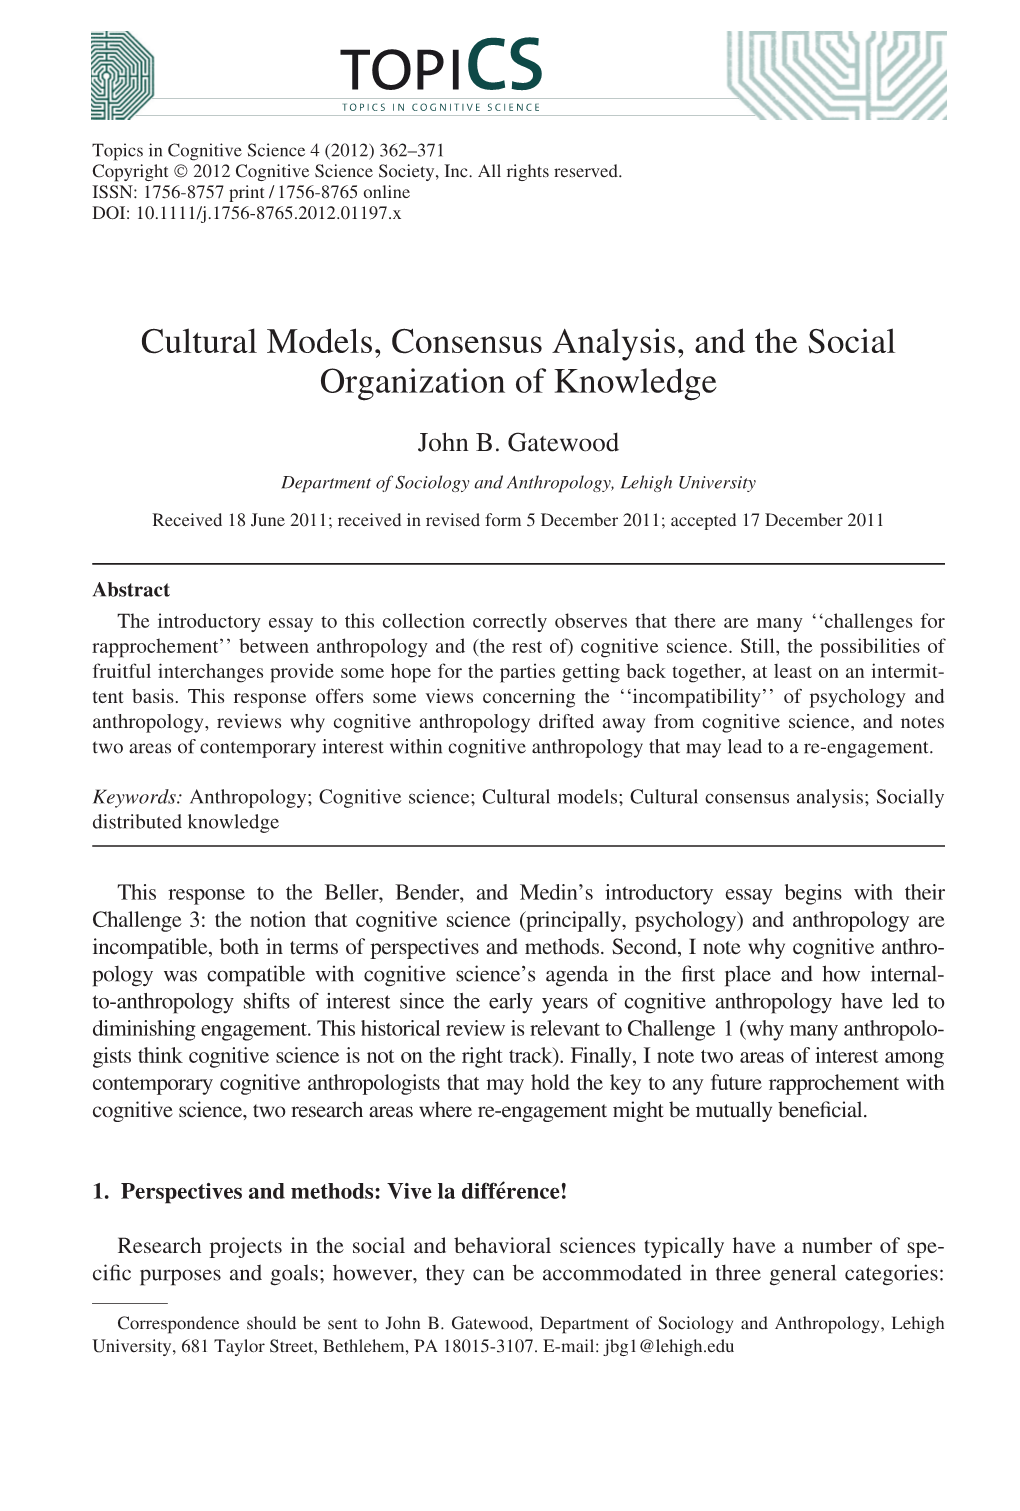 Cultural Models, Consensus Analysis, and the Social Organization of Knowledge